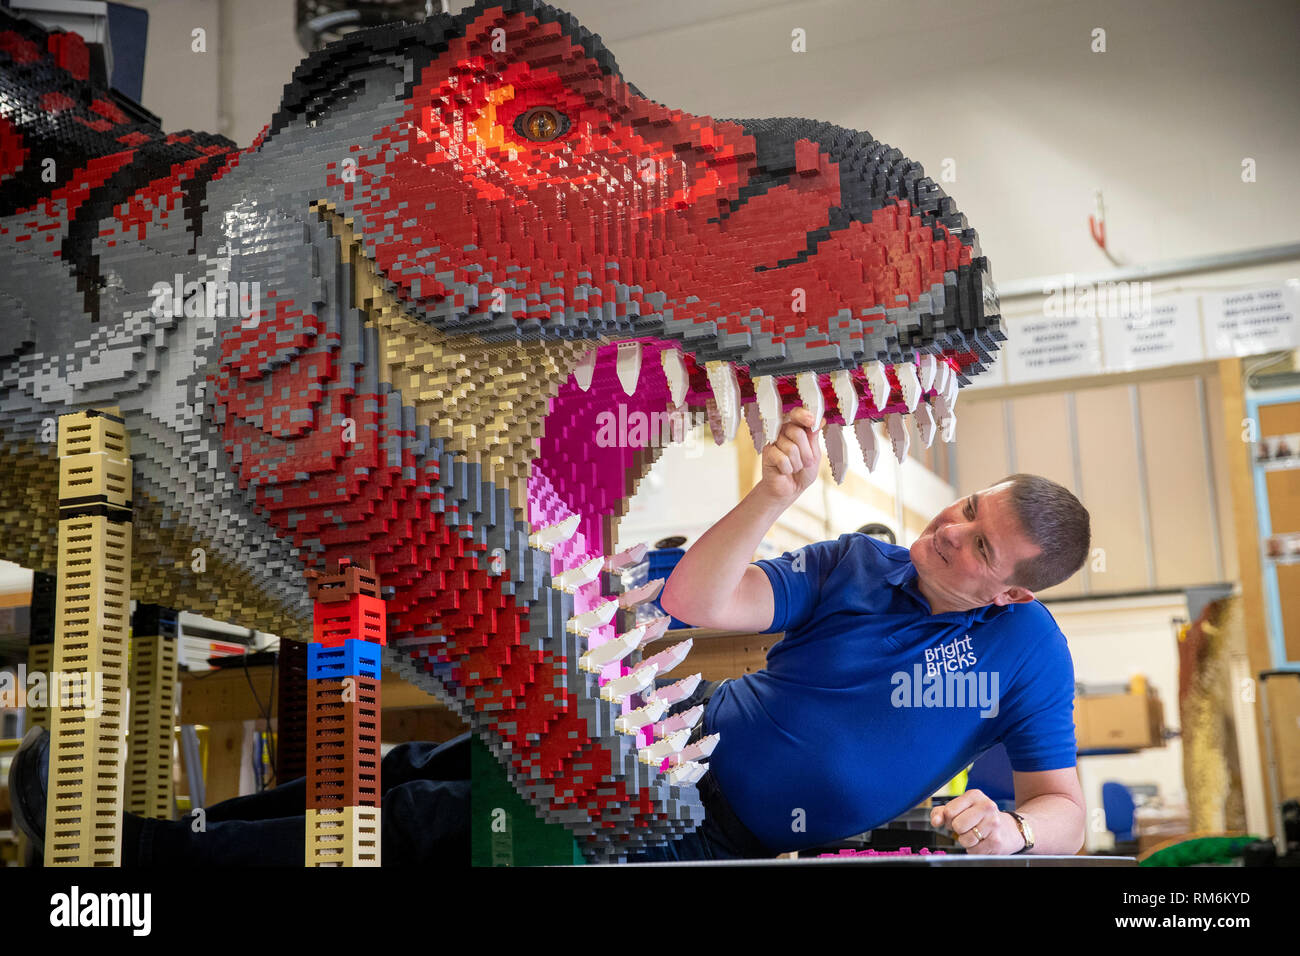 Bright Bricks member of staff Ed Diment works on a life-size T-Rex made out of LEGO during a press preview of Marwell Zoo's new Lego Brickosaurs at Bright Bricks HQ in Bordon, Hampshire. Stock Photo